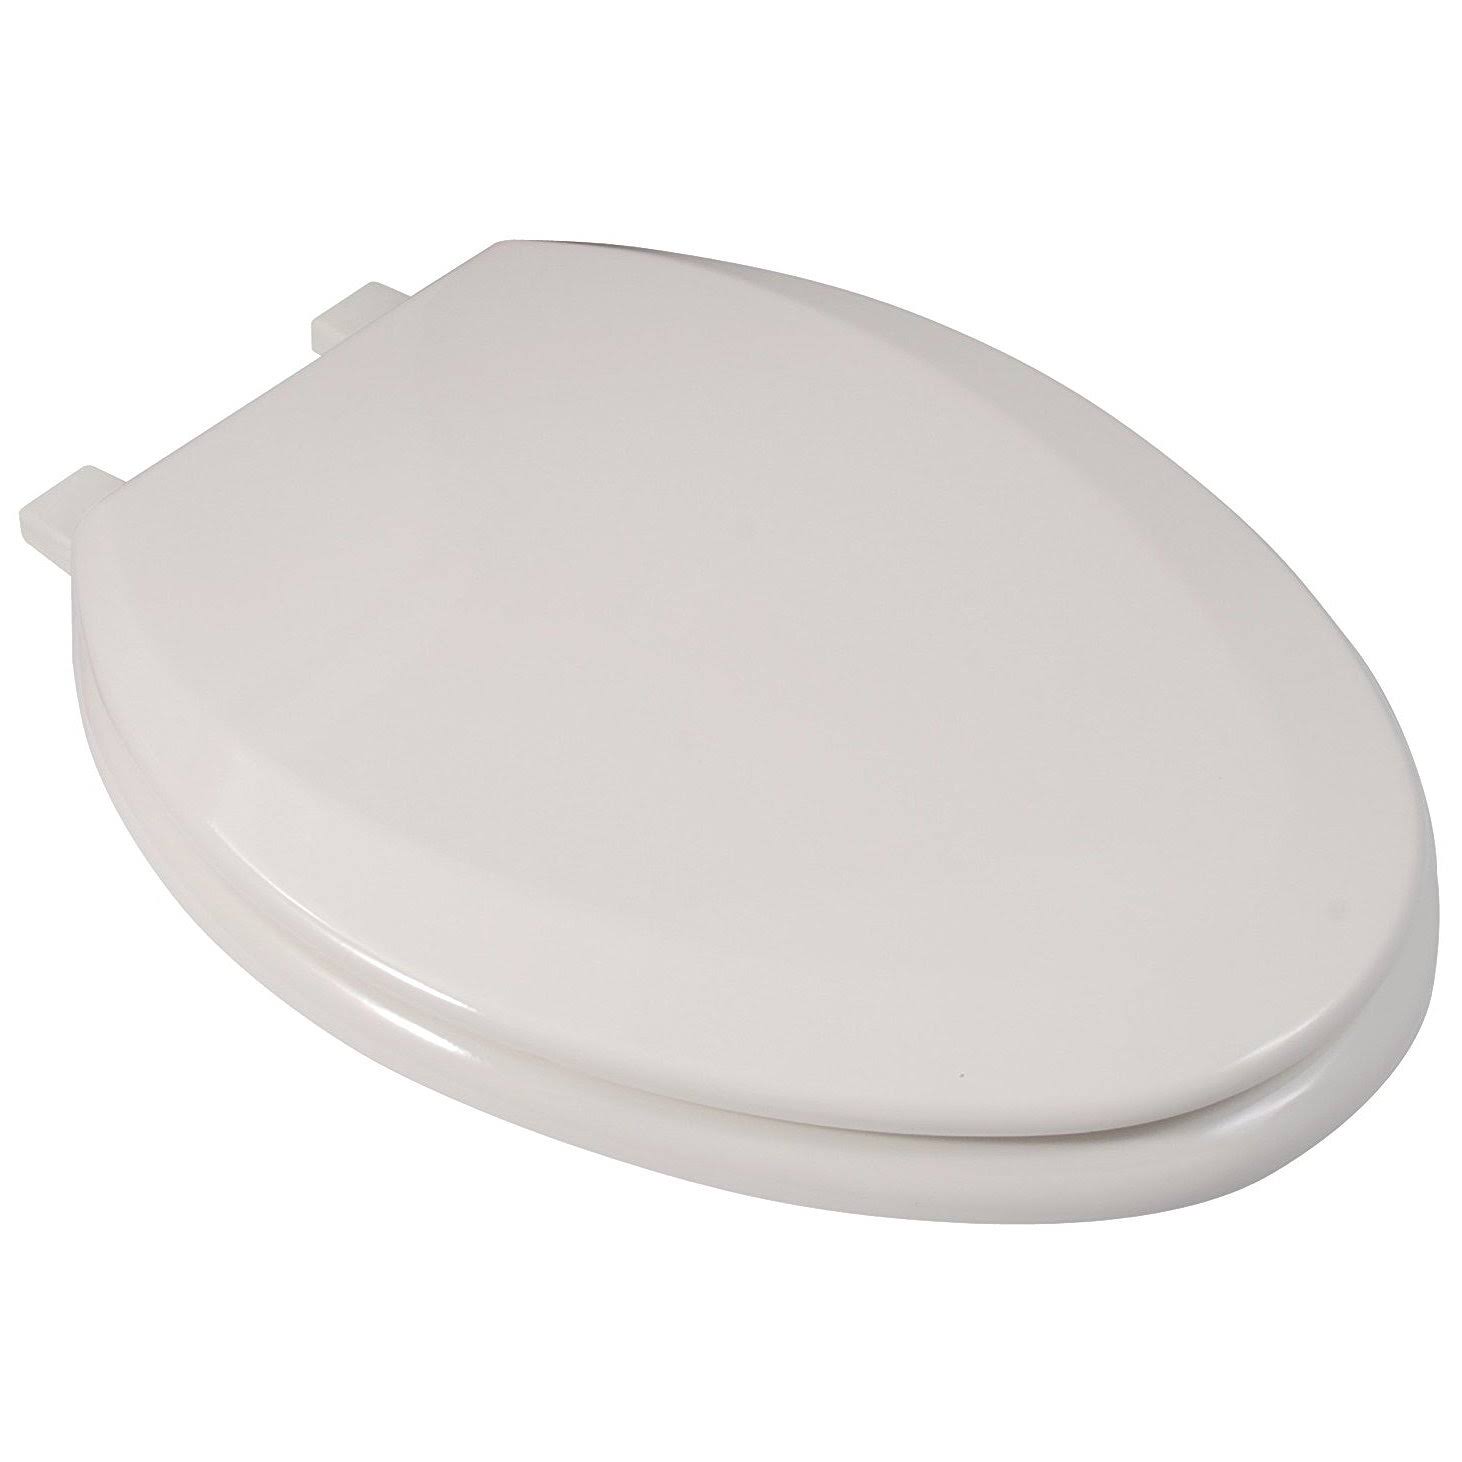 Ldr 050 2044BS Elongated Wood Toilet Seat with Plastic Hinge, Biscuit